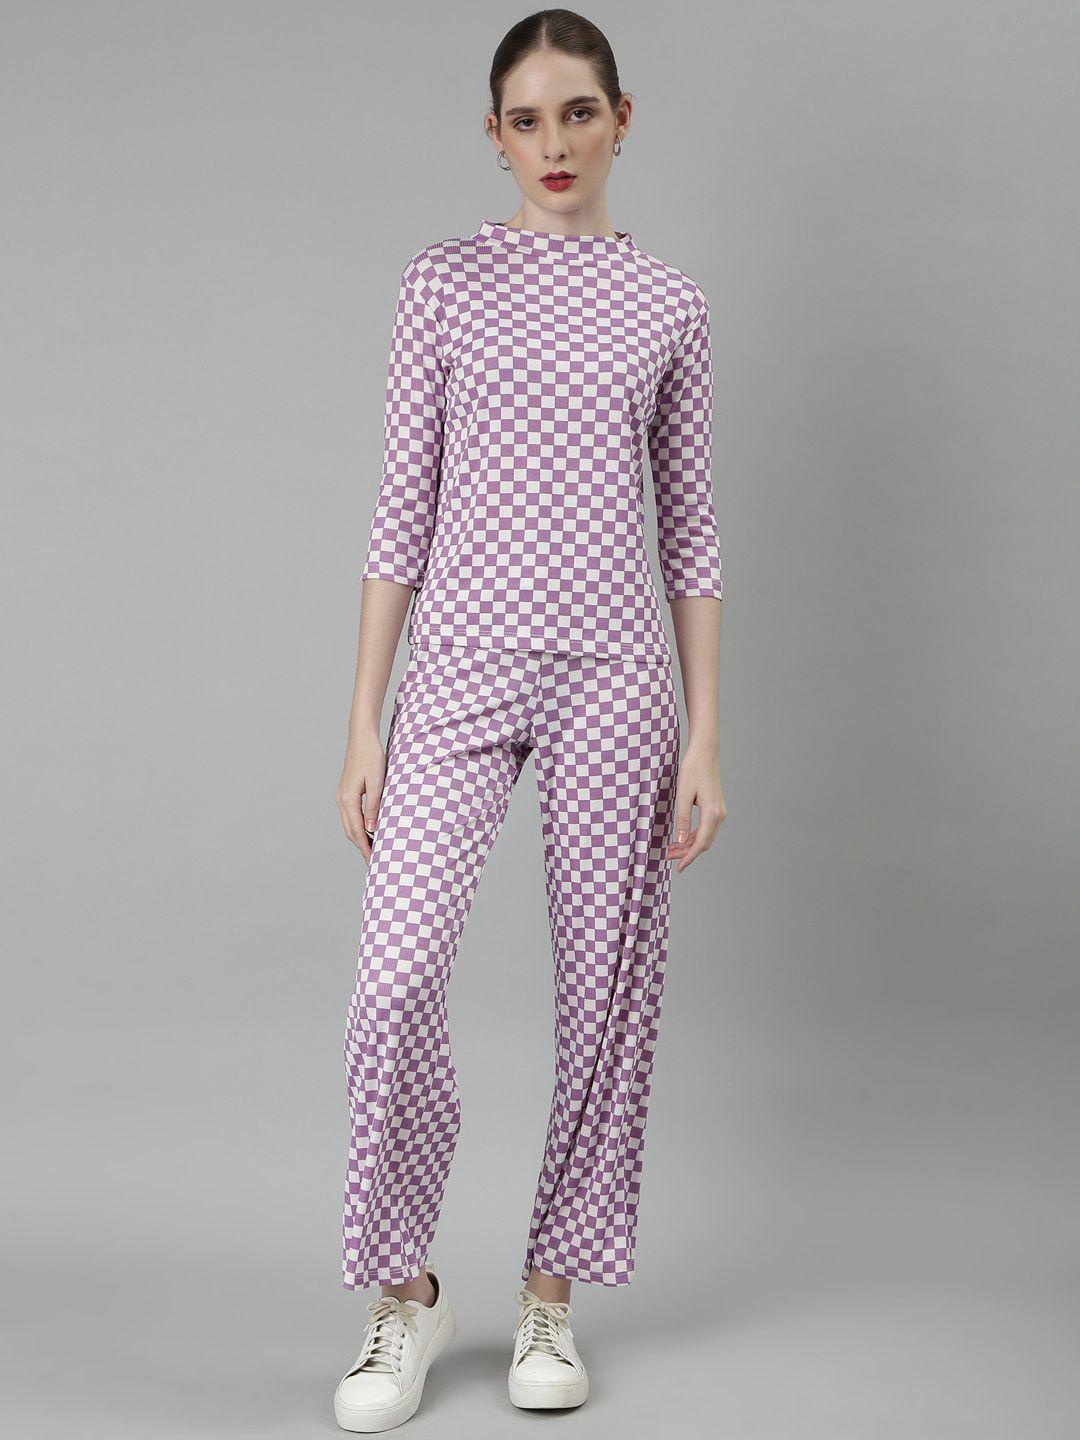 showoff checked high neck top with trousers